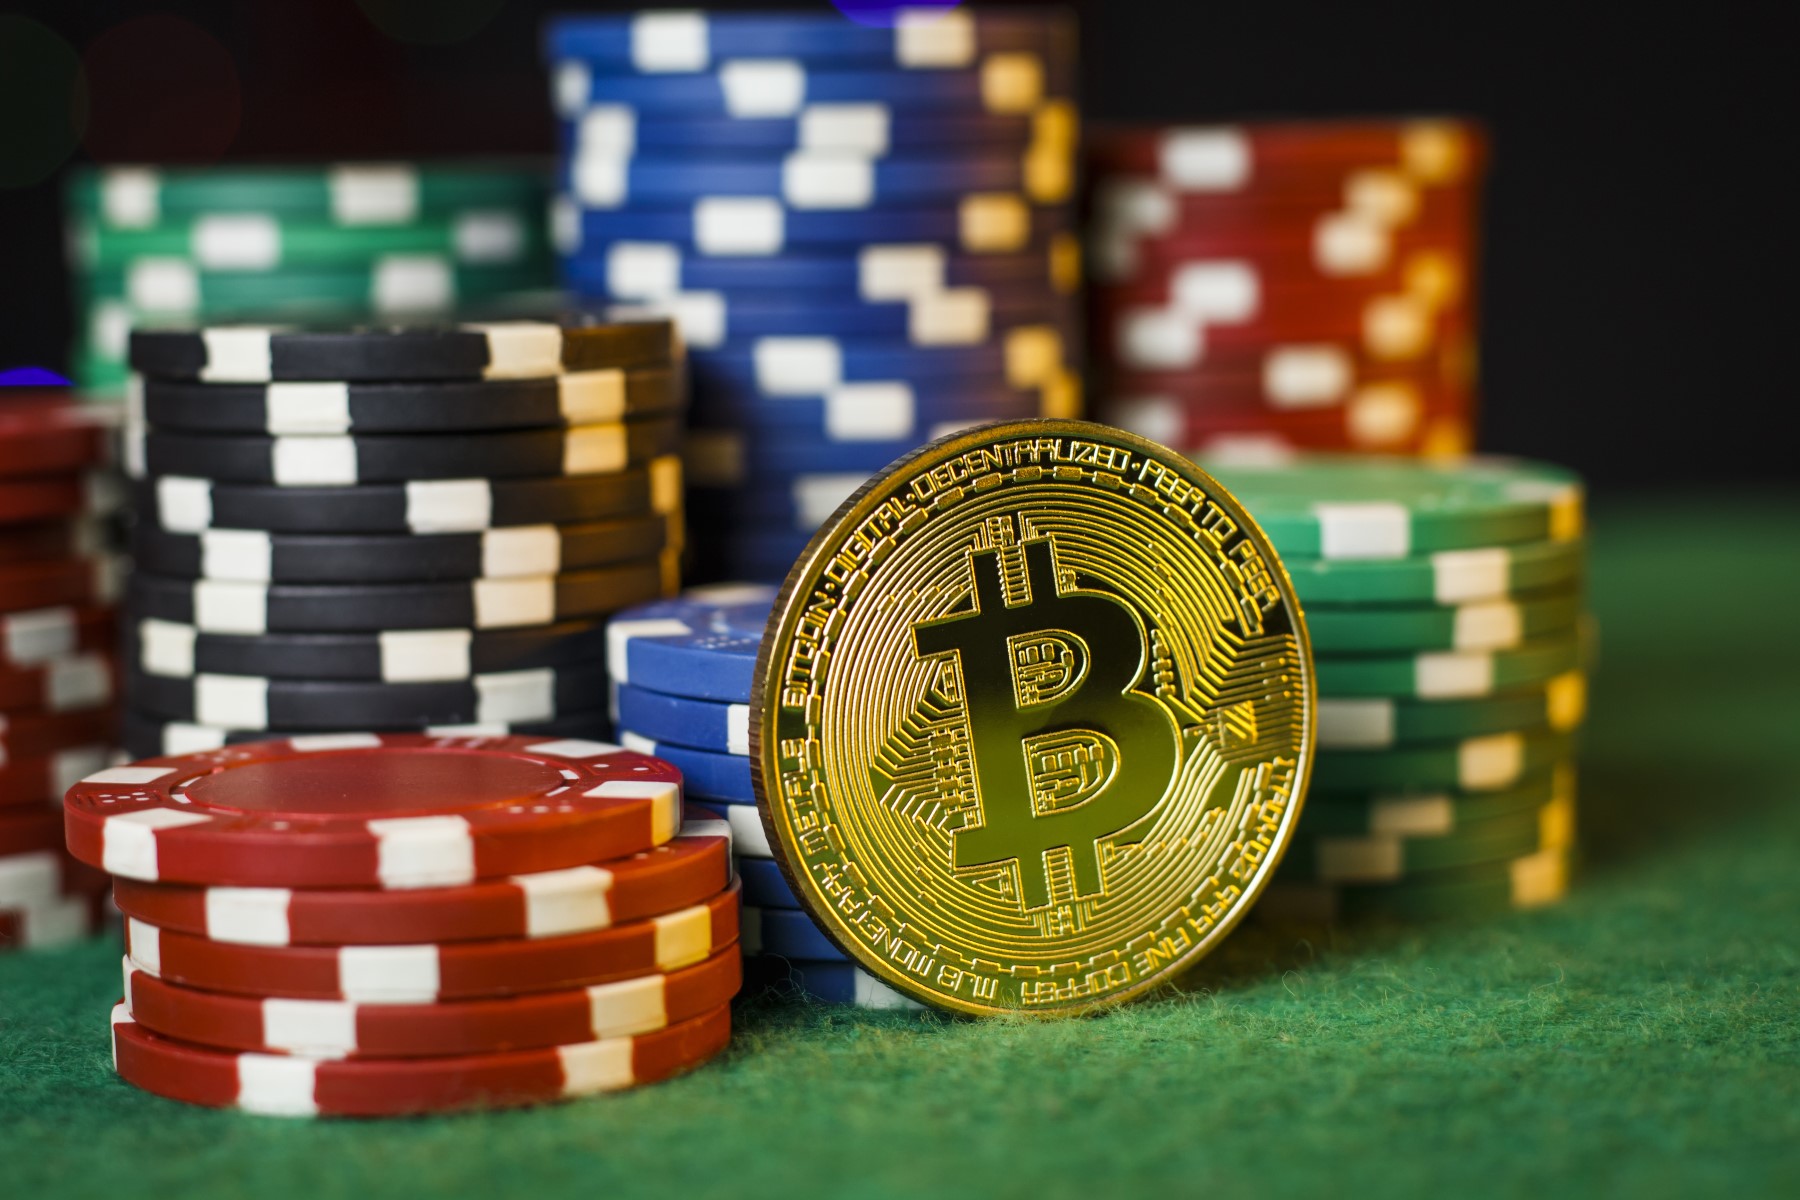 bitcoin casinos and sports betting